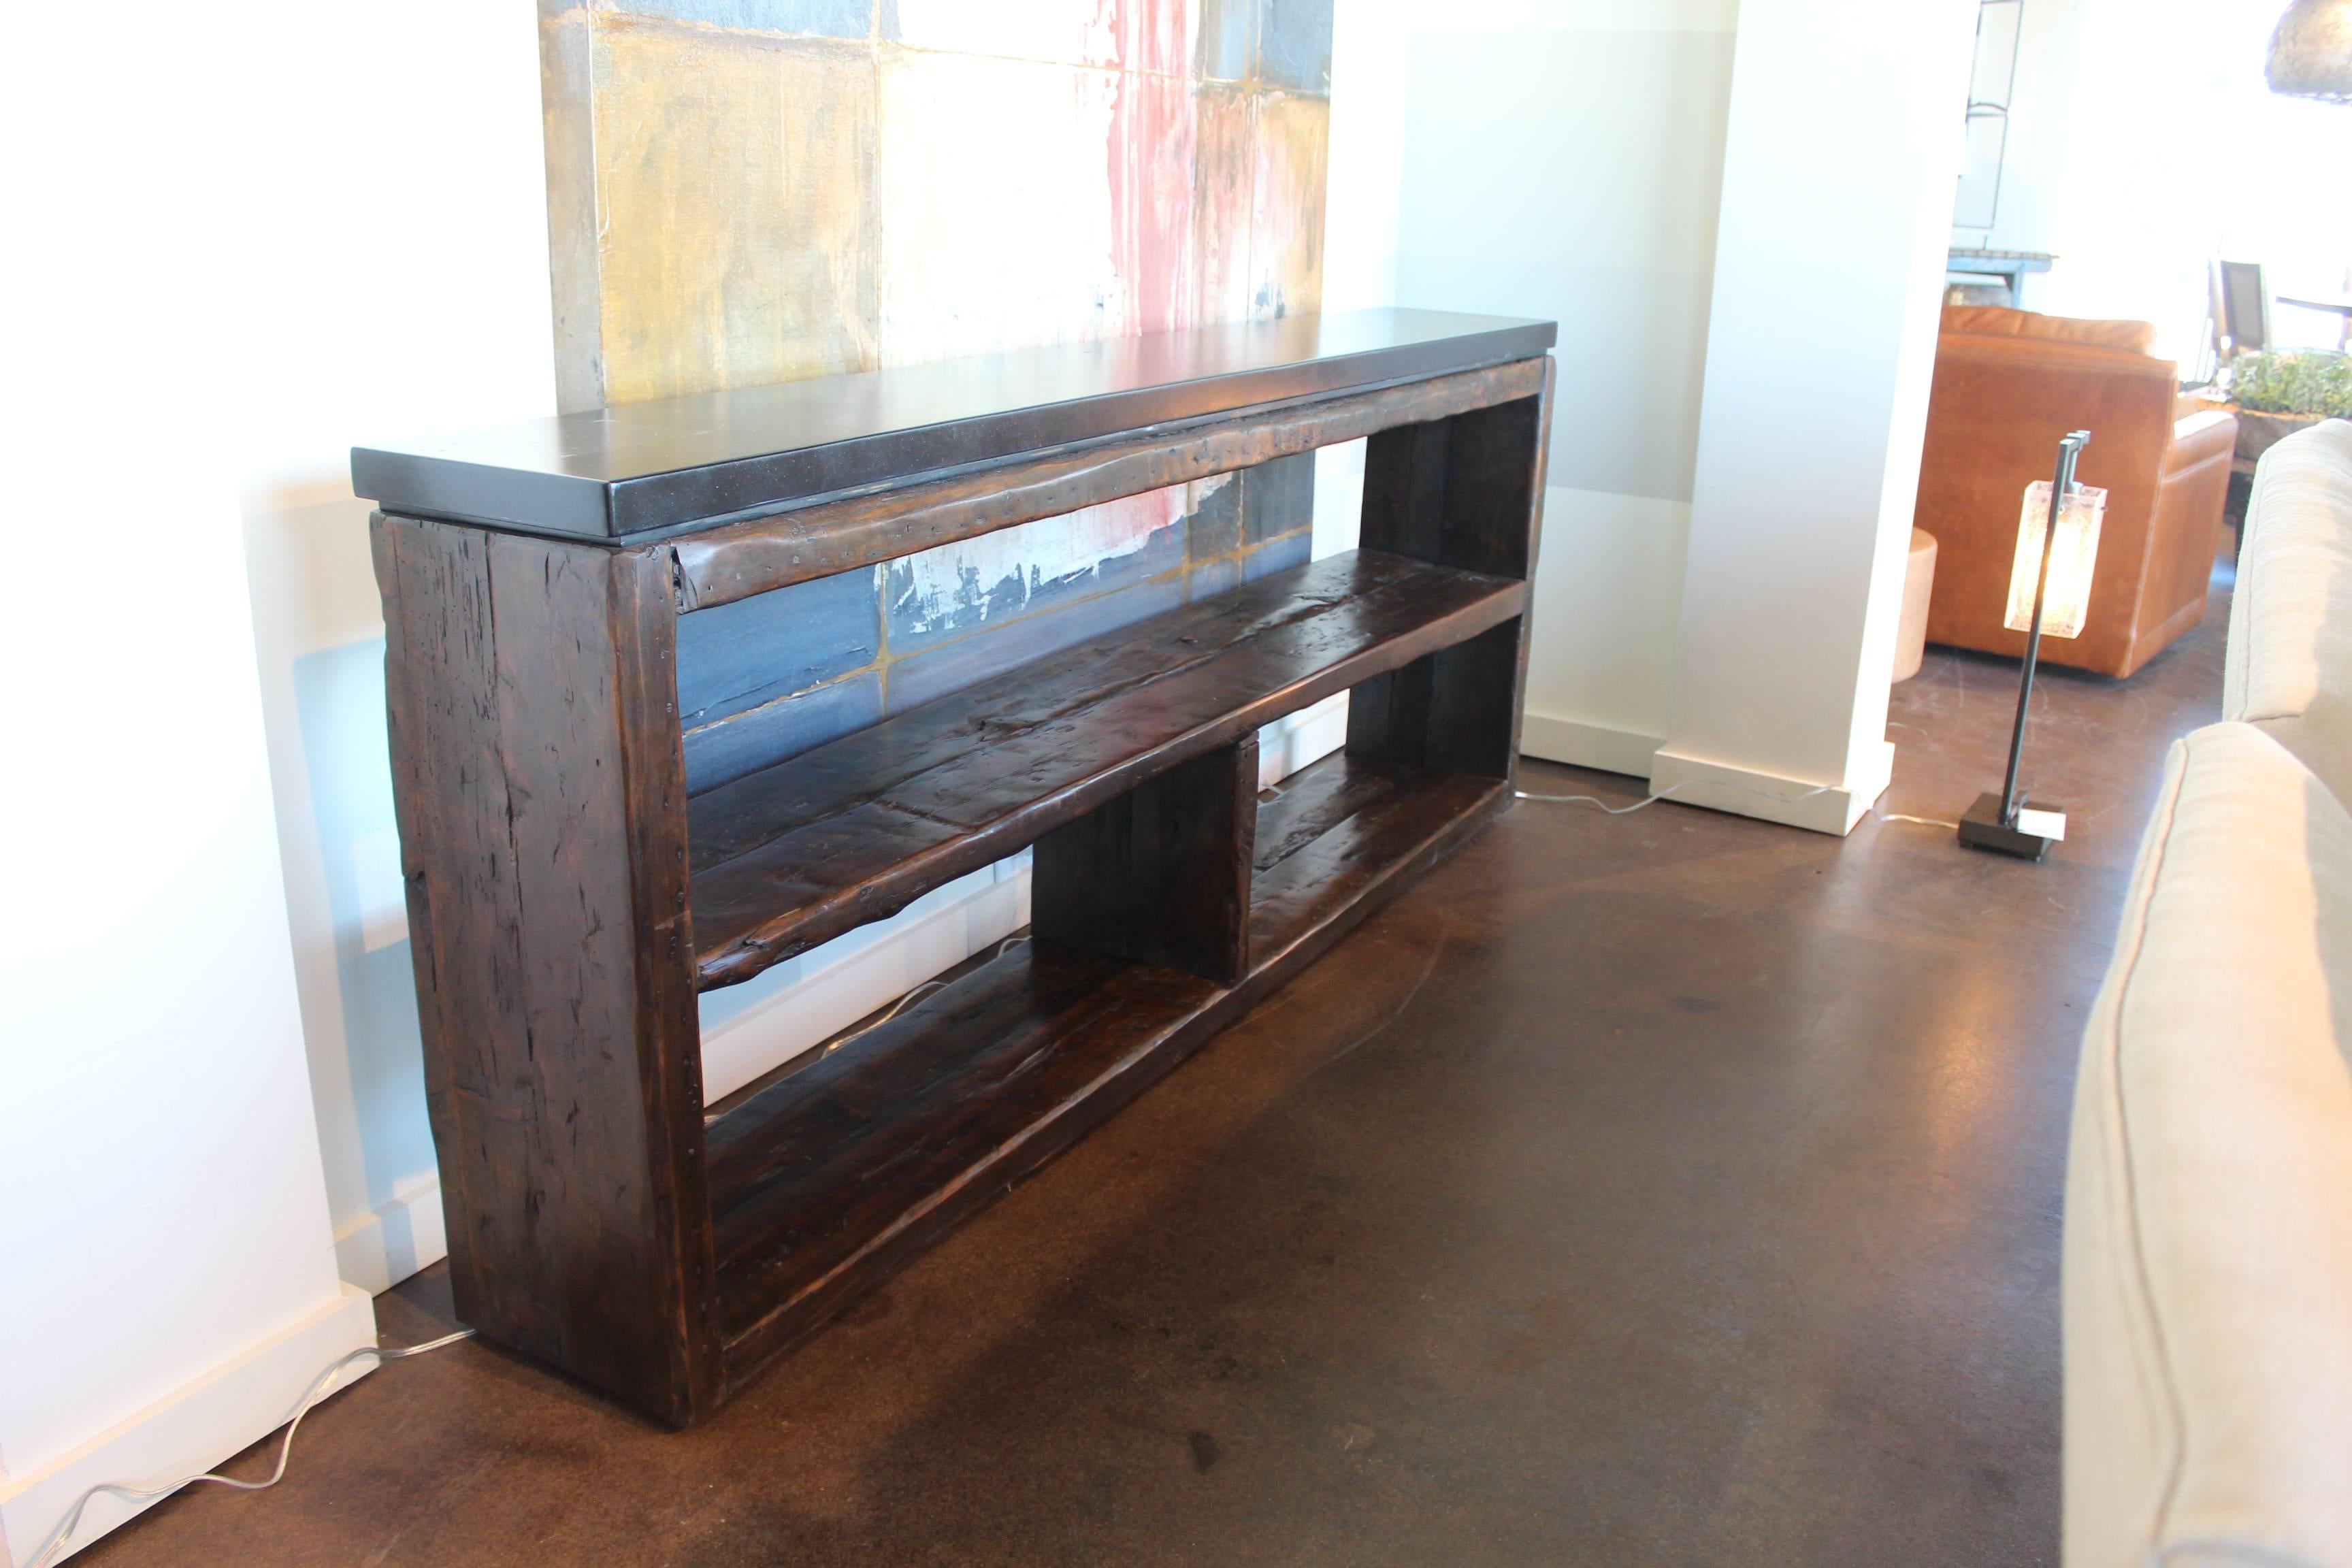 Console made from French re-claimed pine with ebonized limestone top.

Brendan Bass Custom - Item can be reproduced